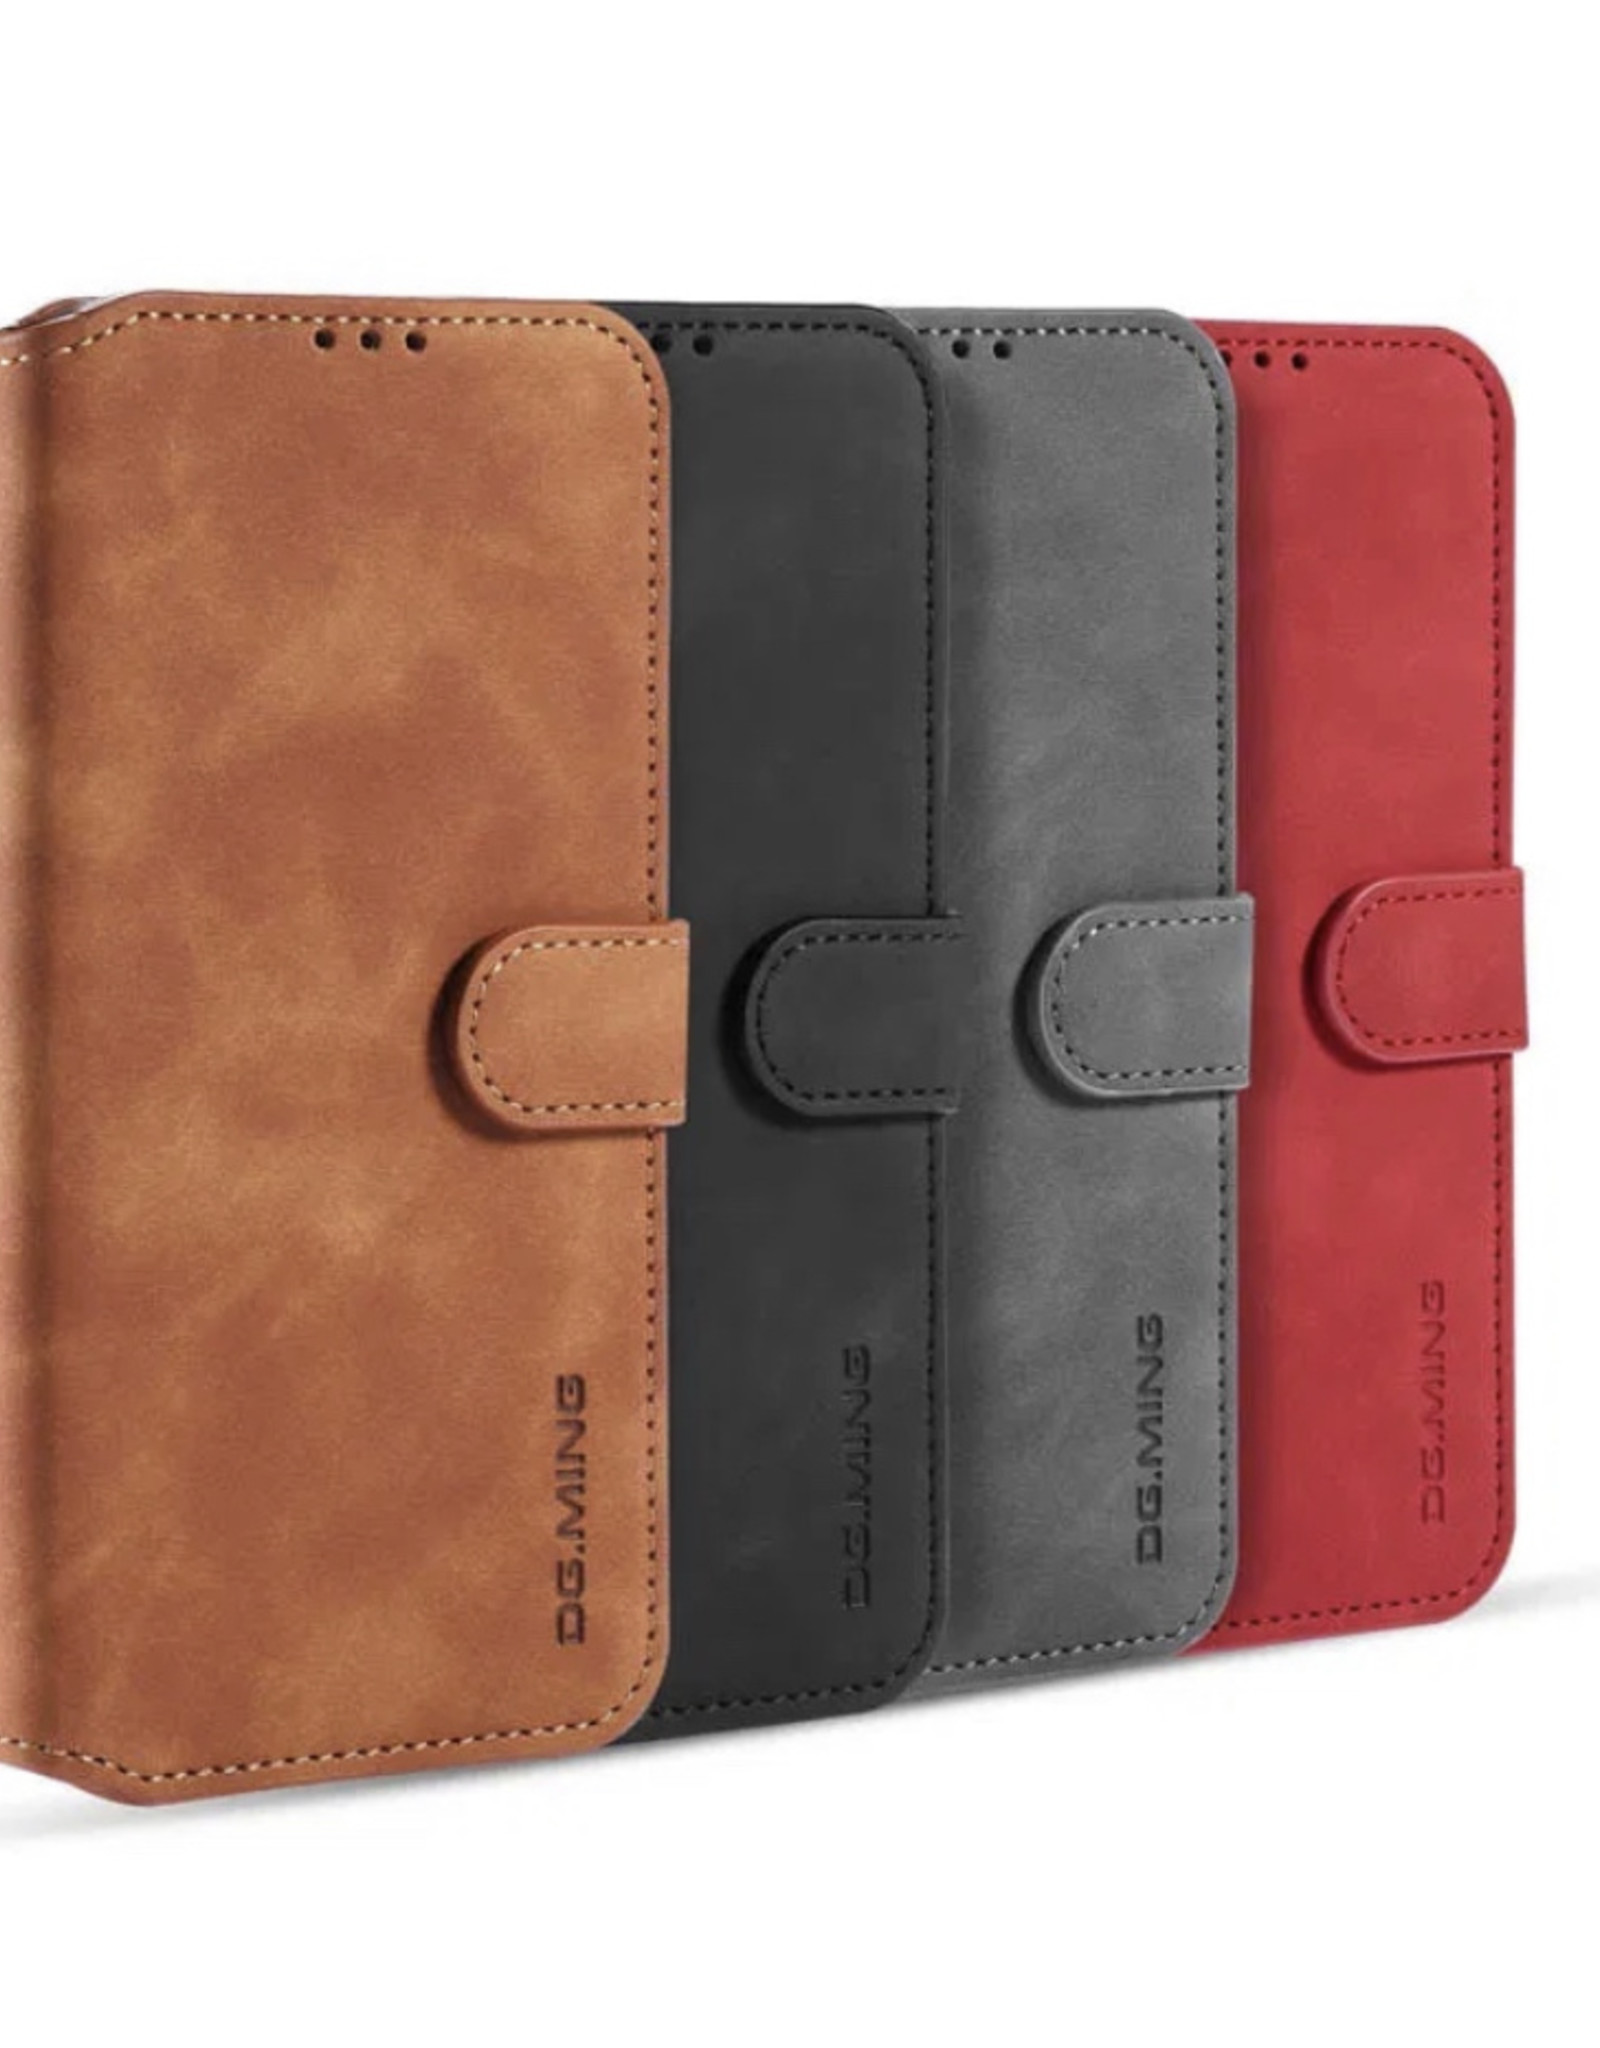 D.G. Ming DG.MING Retro Leather Wallet Case for Samsung Galaxy